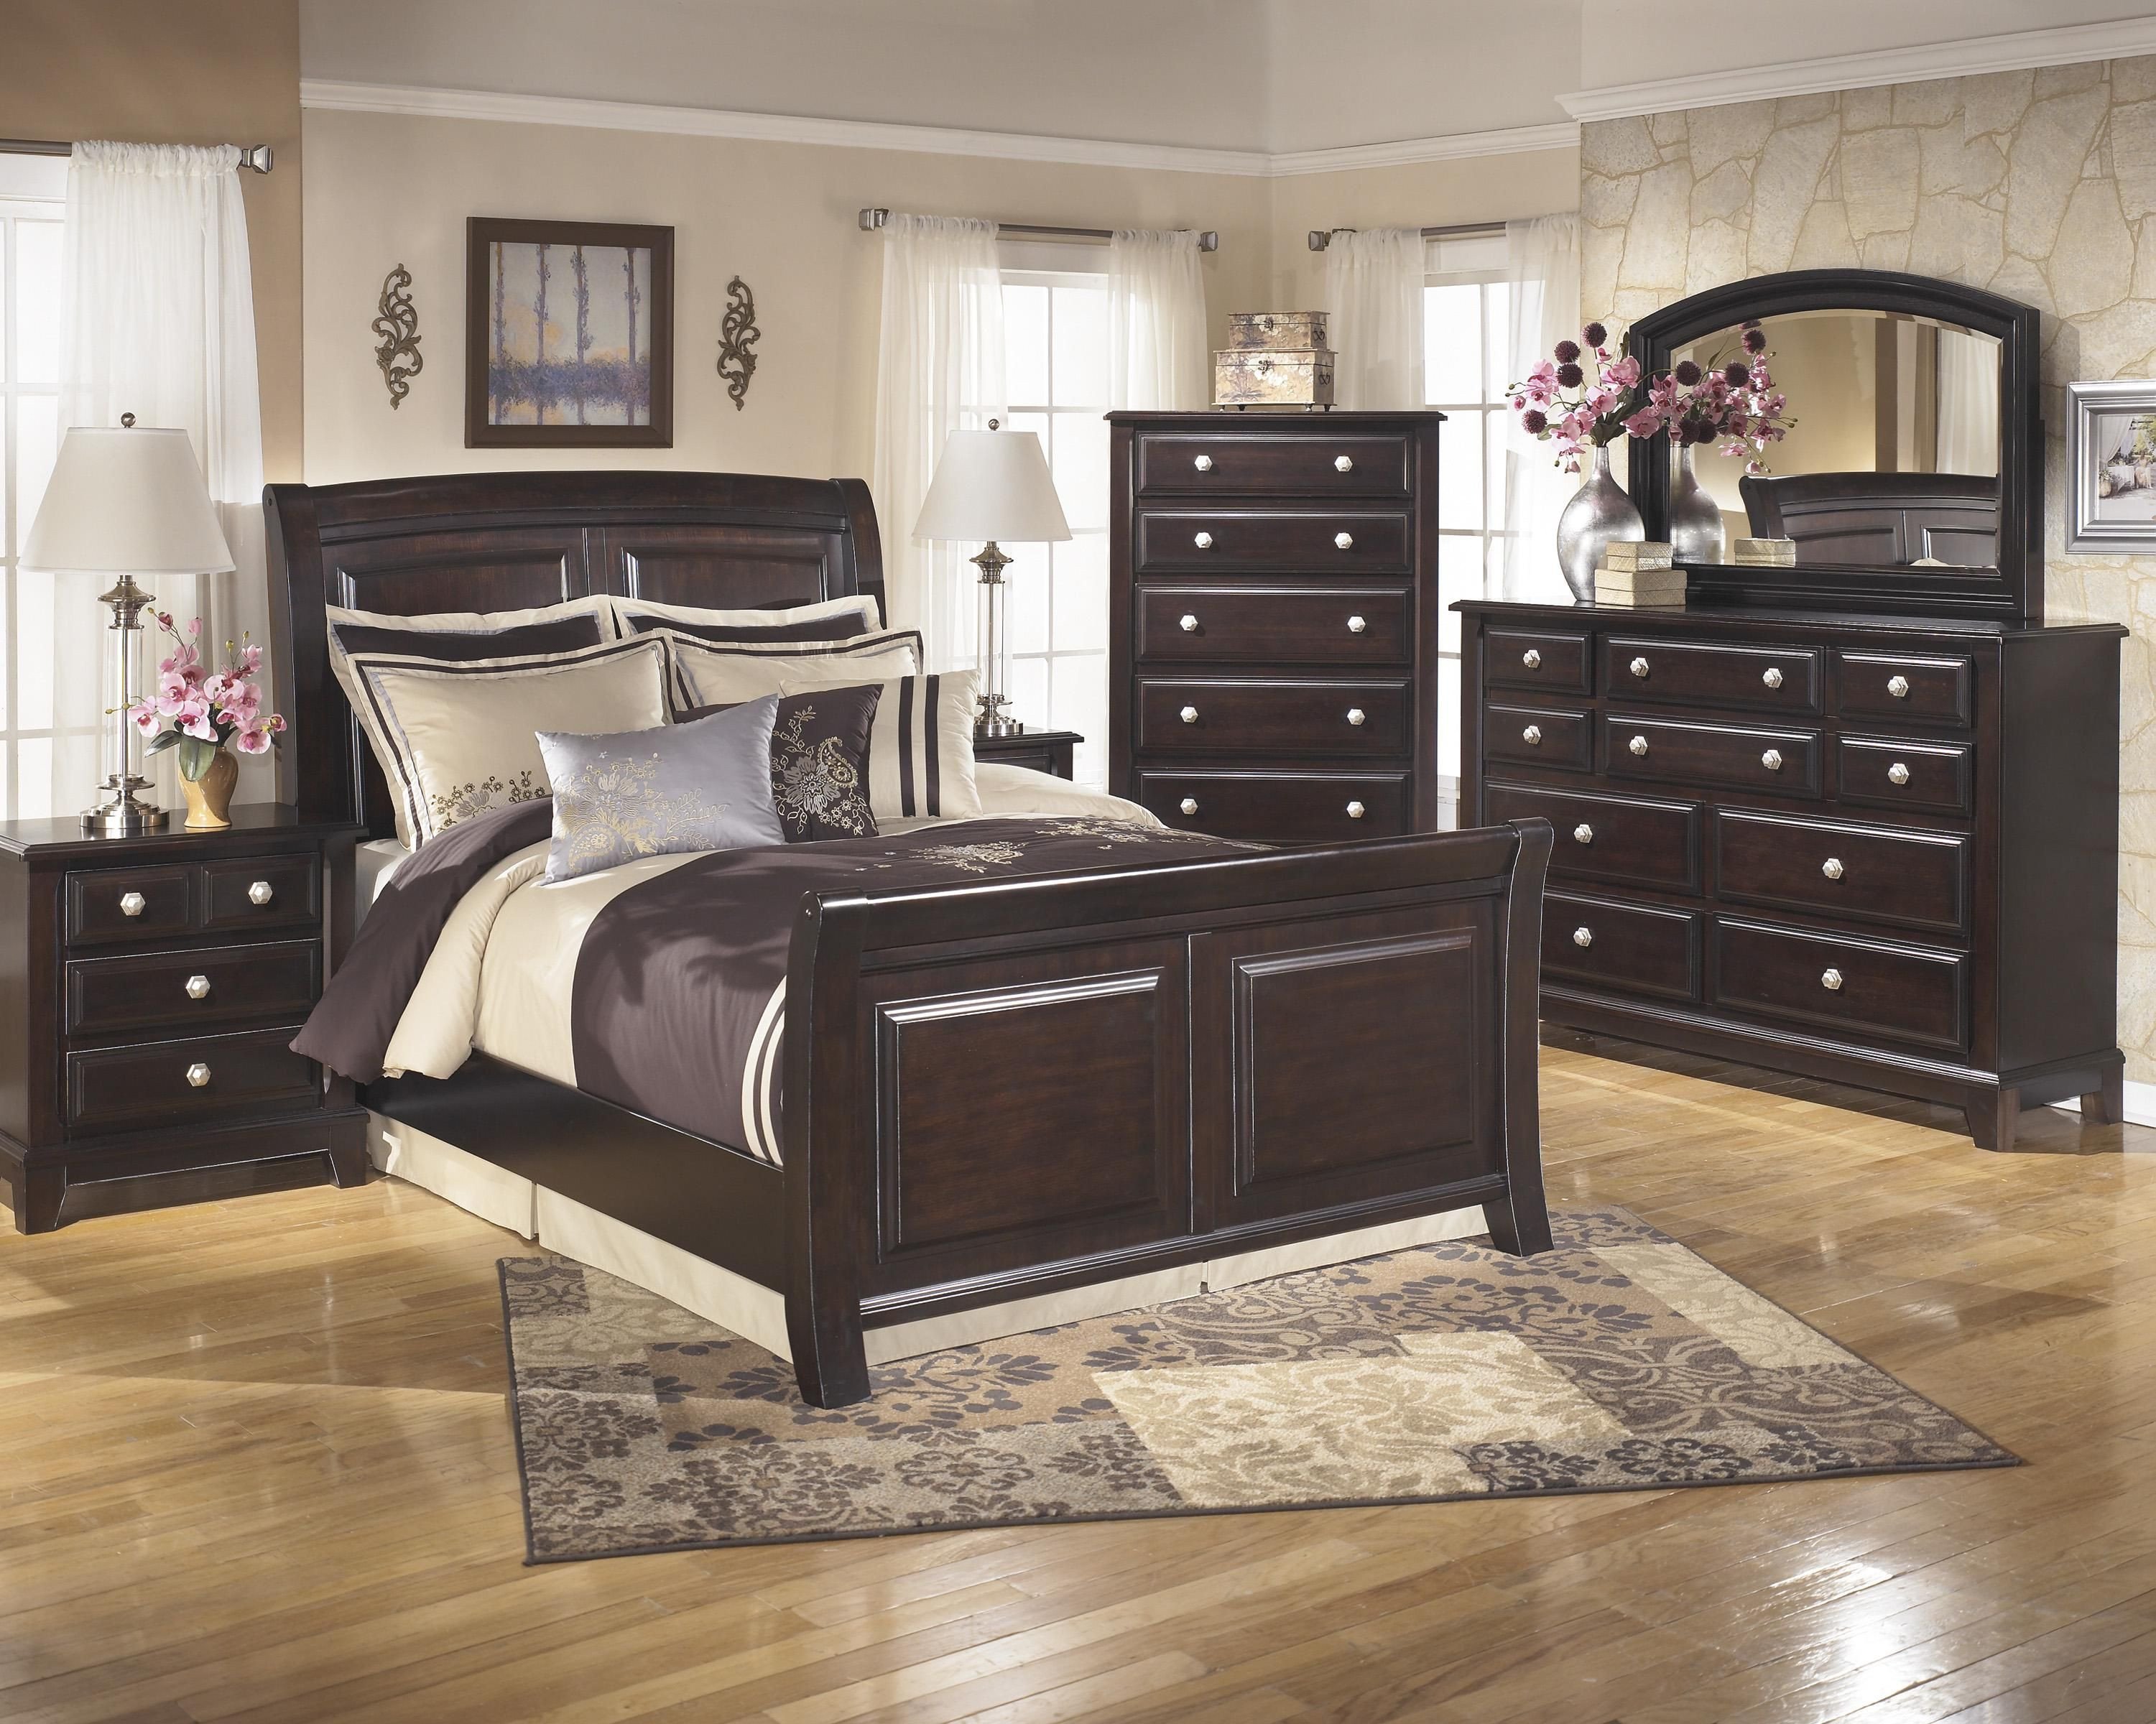 King Bedroom Set Cheap Best Of Ridgley King Bedroom Group by Signature Design by ashley